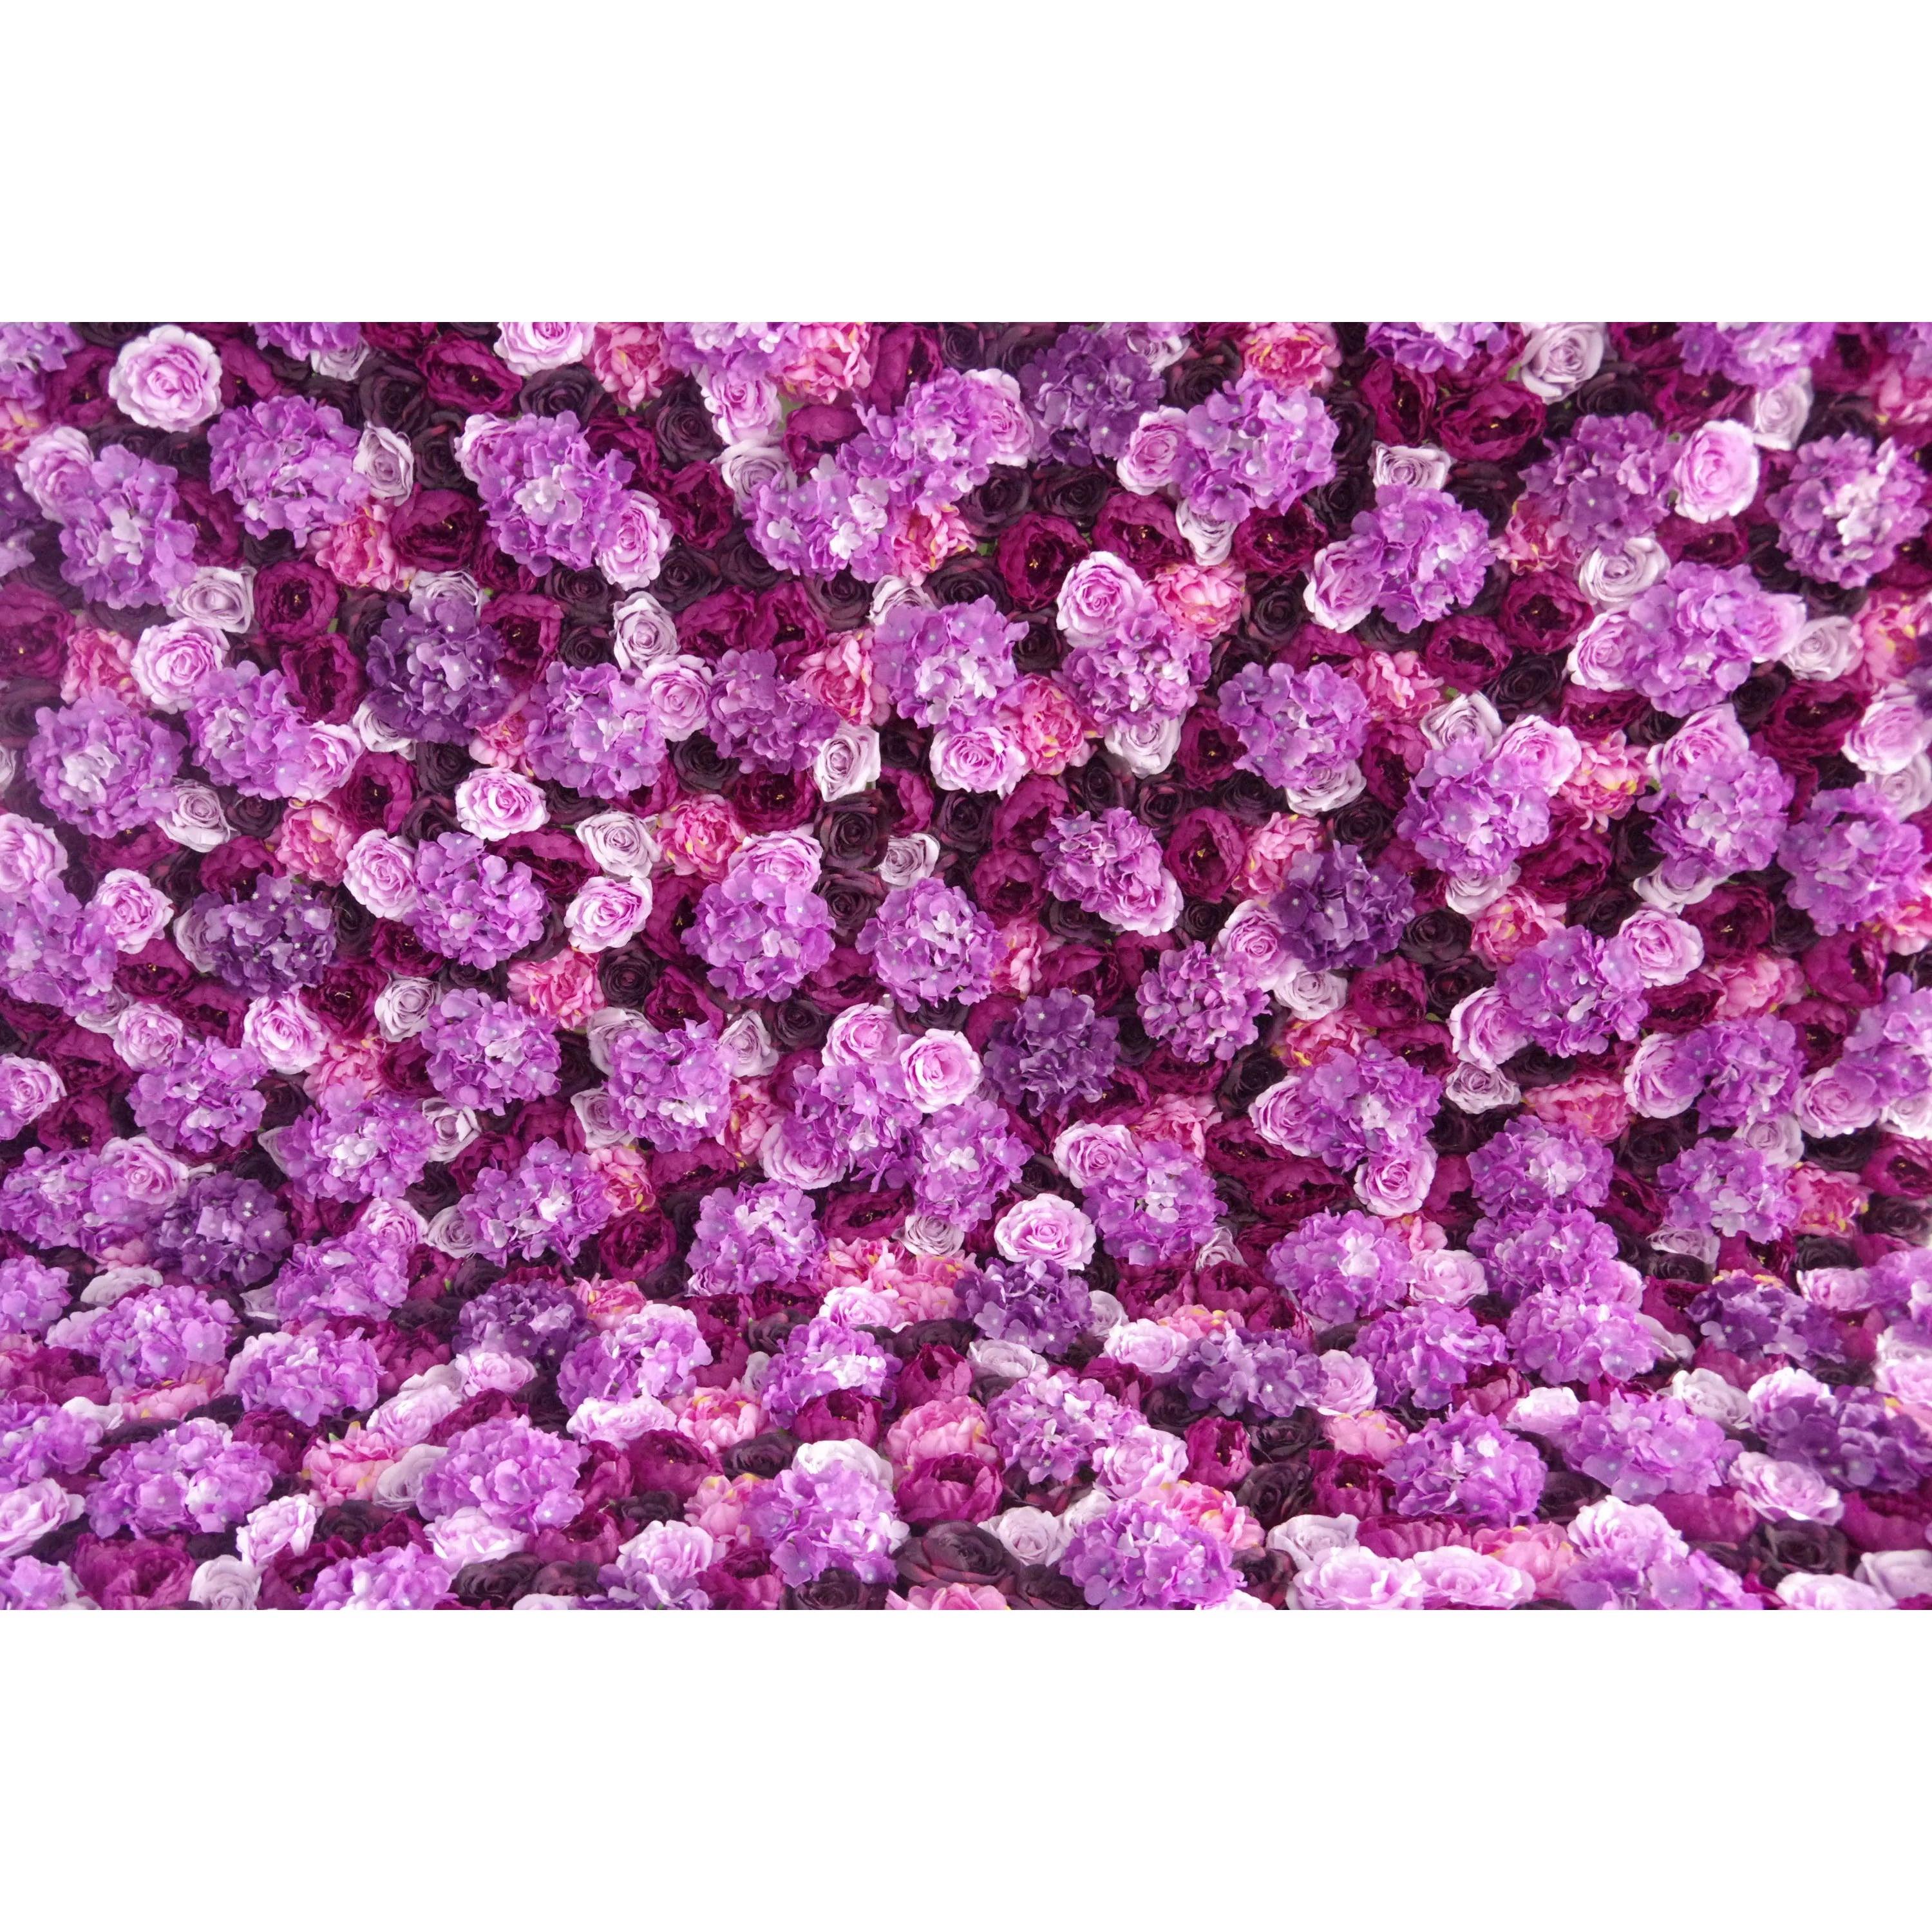 Valar Flowers Roll Up Fabric Artificial Mixed Dusty Lavender and Soft Purple Flower Wall Wedding Backdrop, Floral Party Decor -VF-057